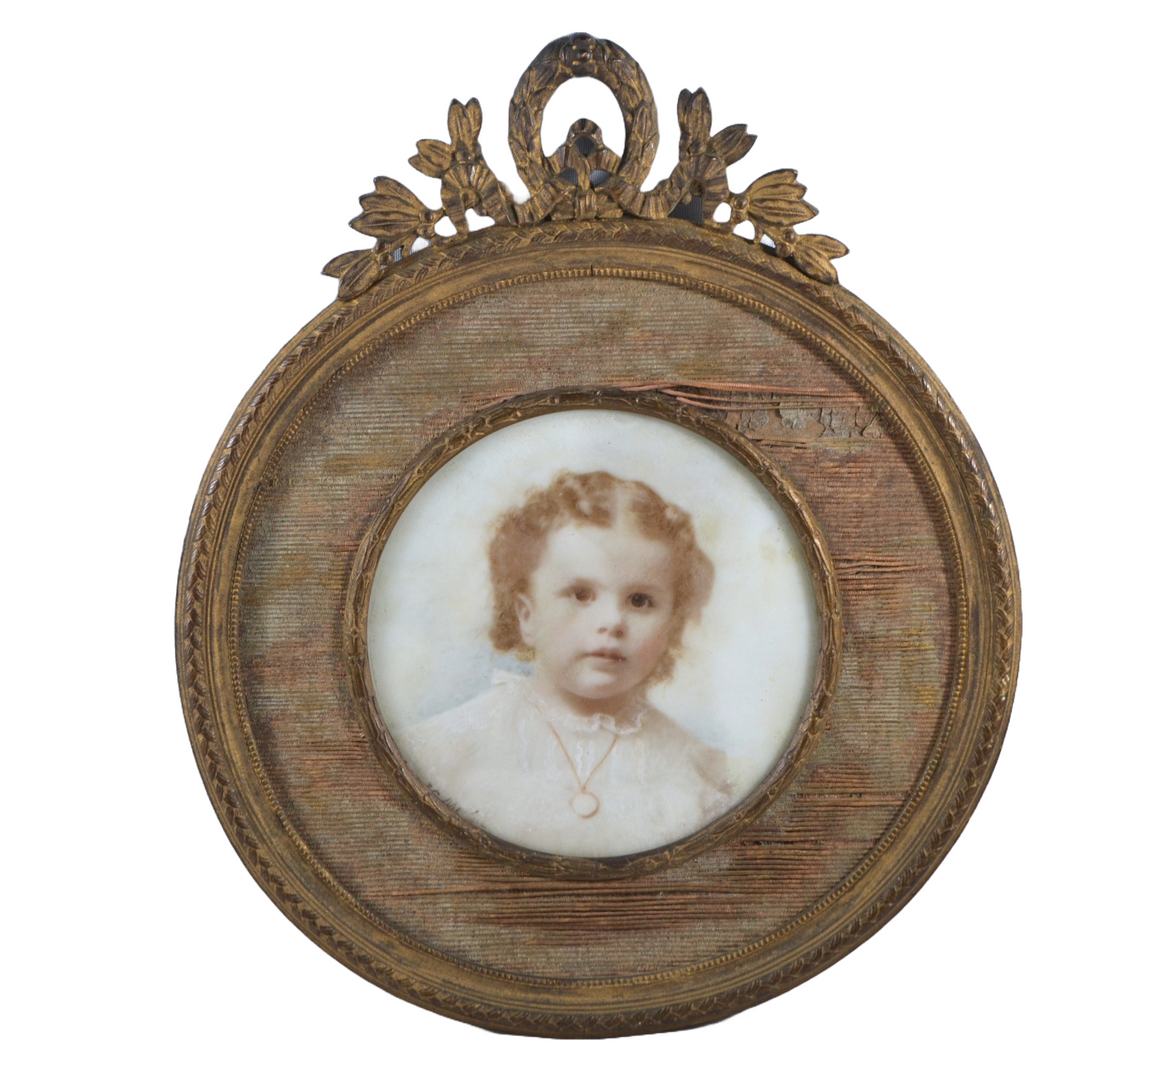 Antique 19th Century Framed Miniature Painting on Porcelain Portrait of Young Child Mixed Media Watercolor Artist Signed